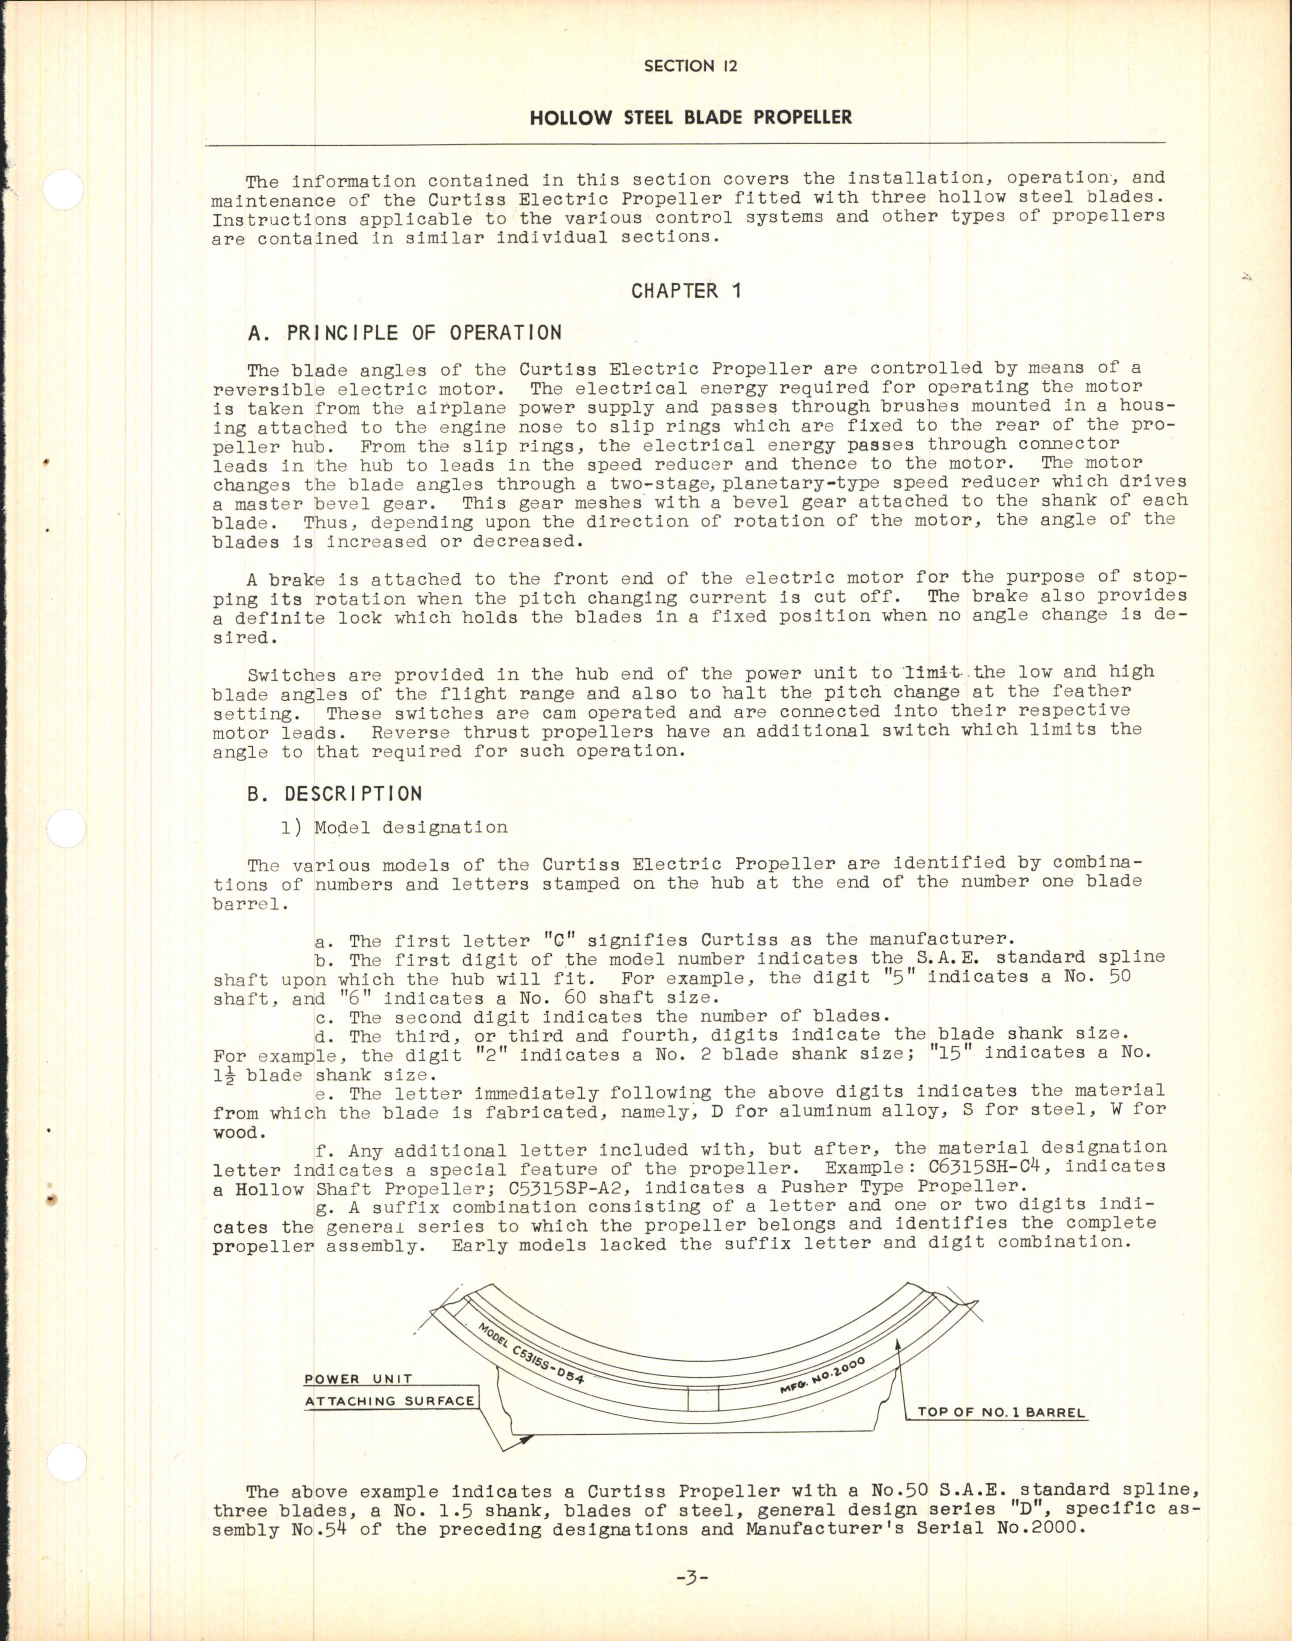 Sample page 5 from AirCorps Library document: Section 12 - Hollow Steel Blade Propeller (Three Blade)